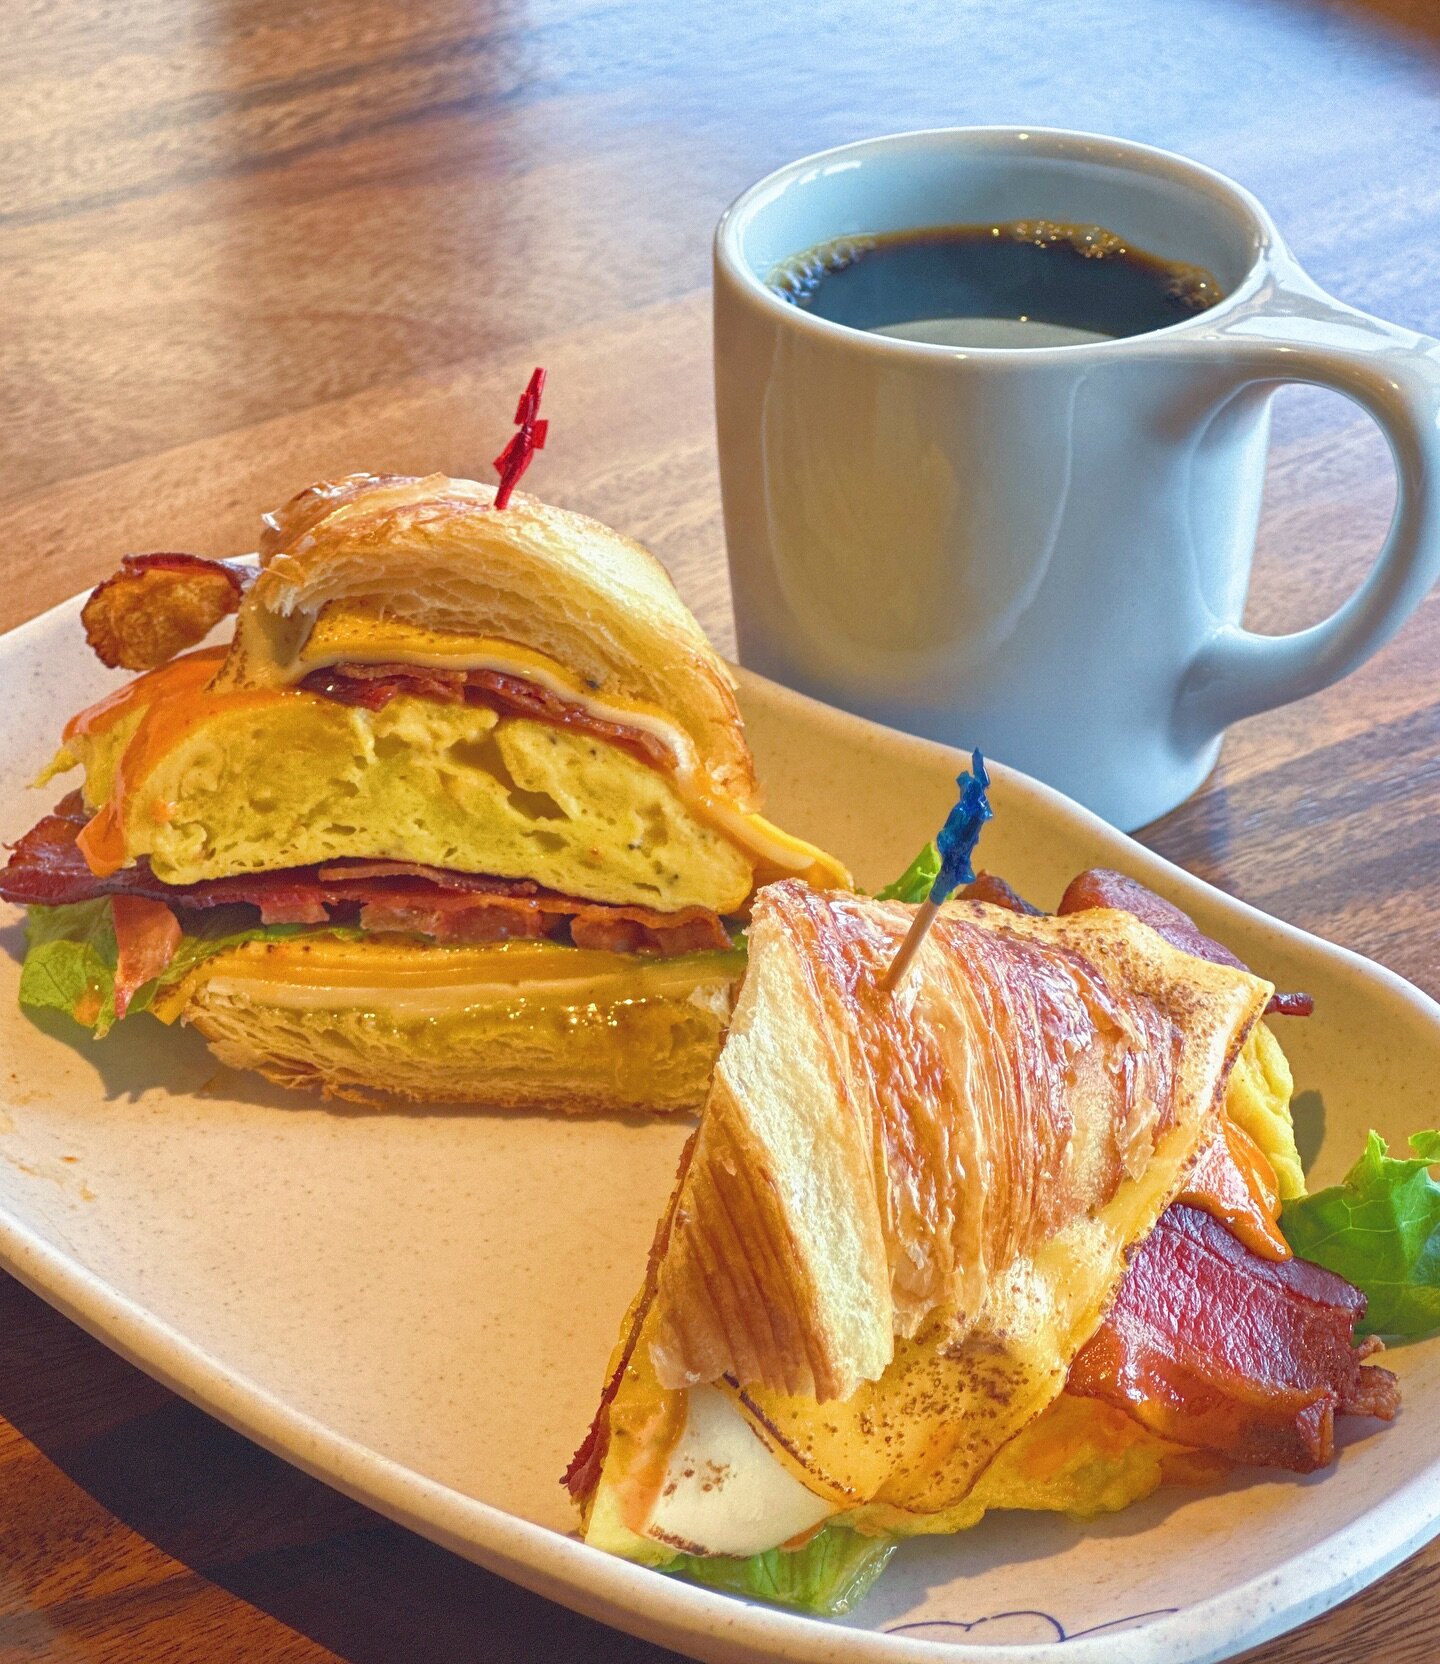 Warm cup of coffee &amp; croissant sandwich to start the day 🥰 #BriansCoffeeRoasters 

☕️ Premium Roasted Coffee
🥐 Pastry / Sandwiches / Pastas &amp; more
🔸8am - 4pm Daily (closed Tues)
📌 4109 TX-121, Carrollton TX 75010
.
.
#BriansCoffeeRoasters